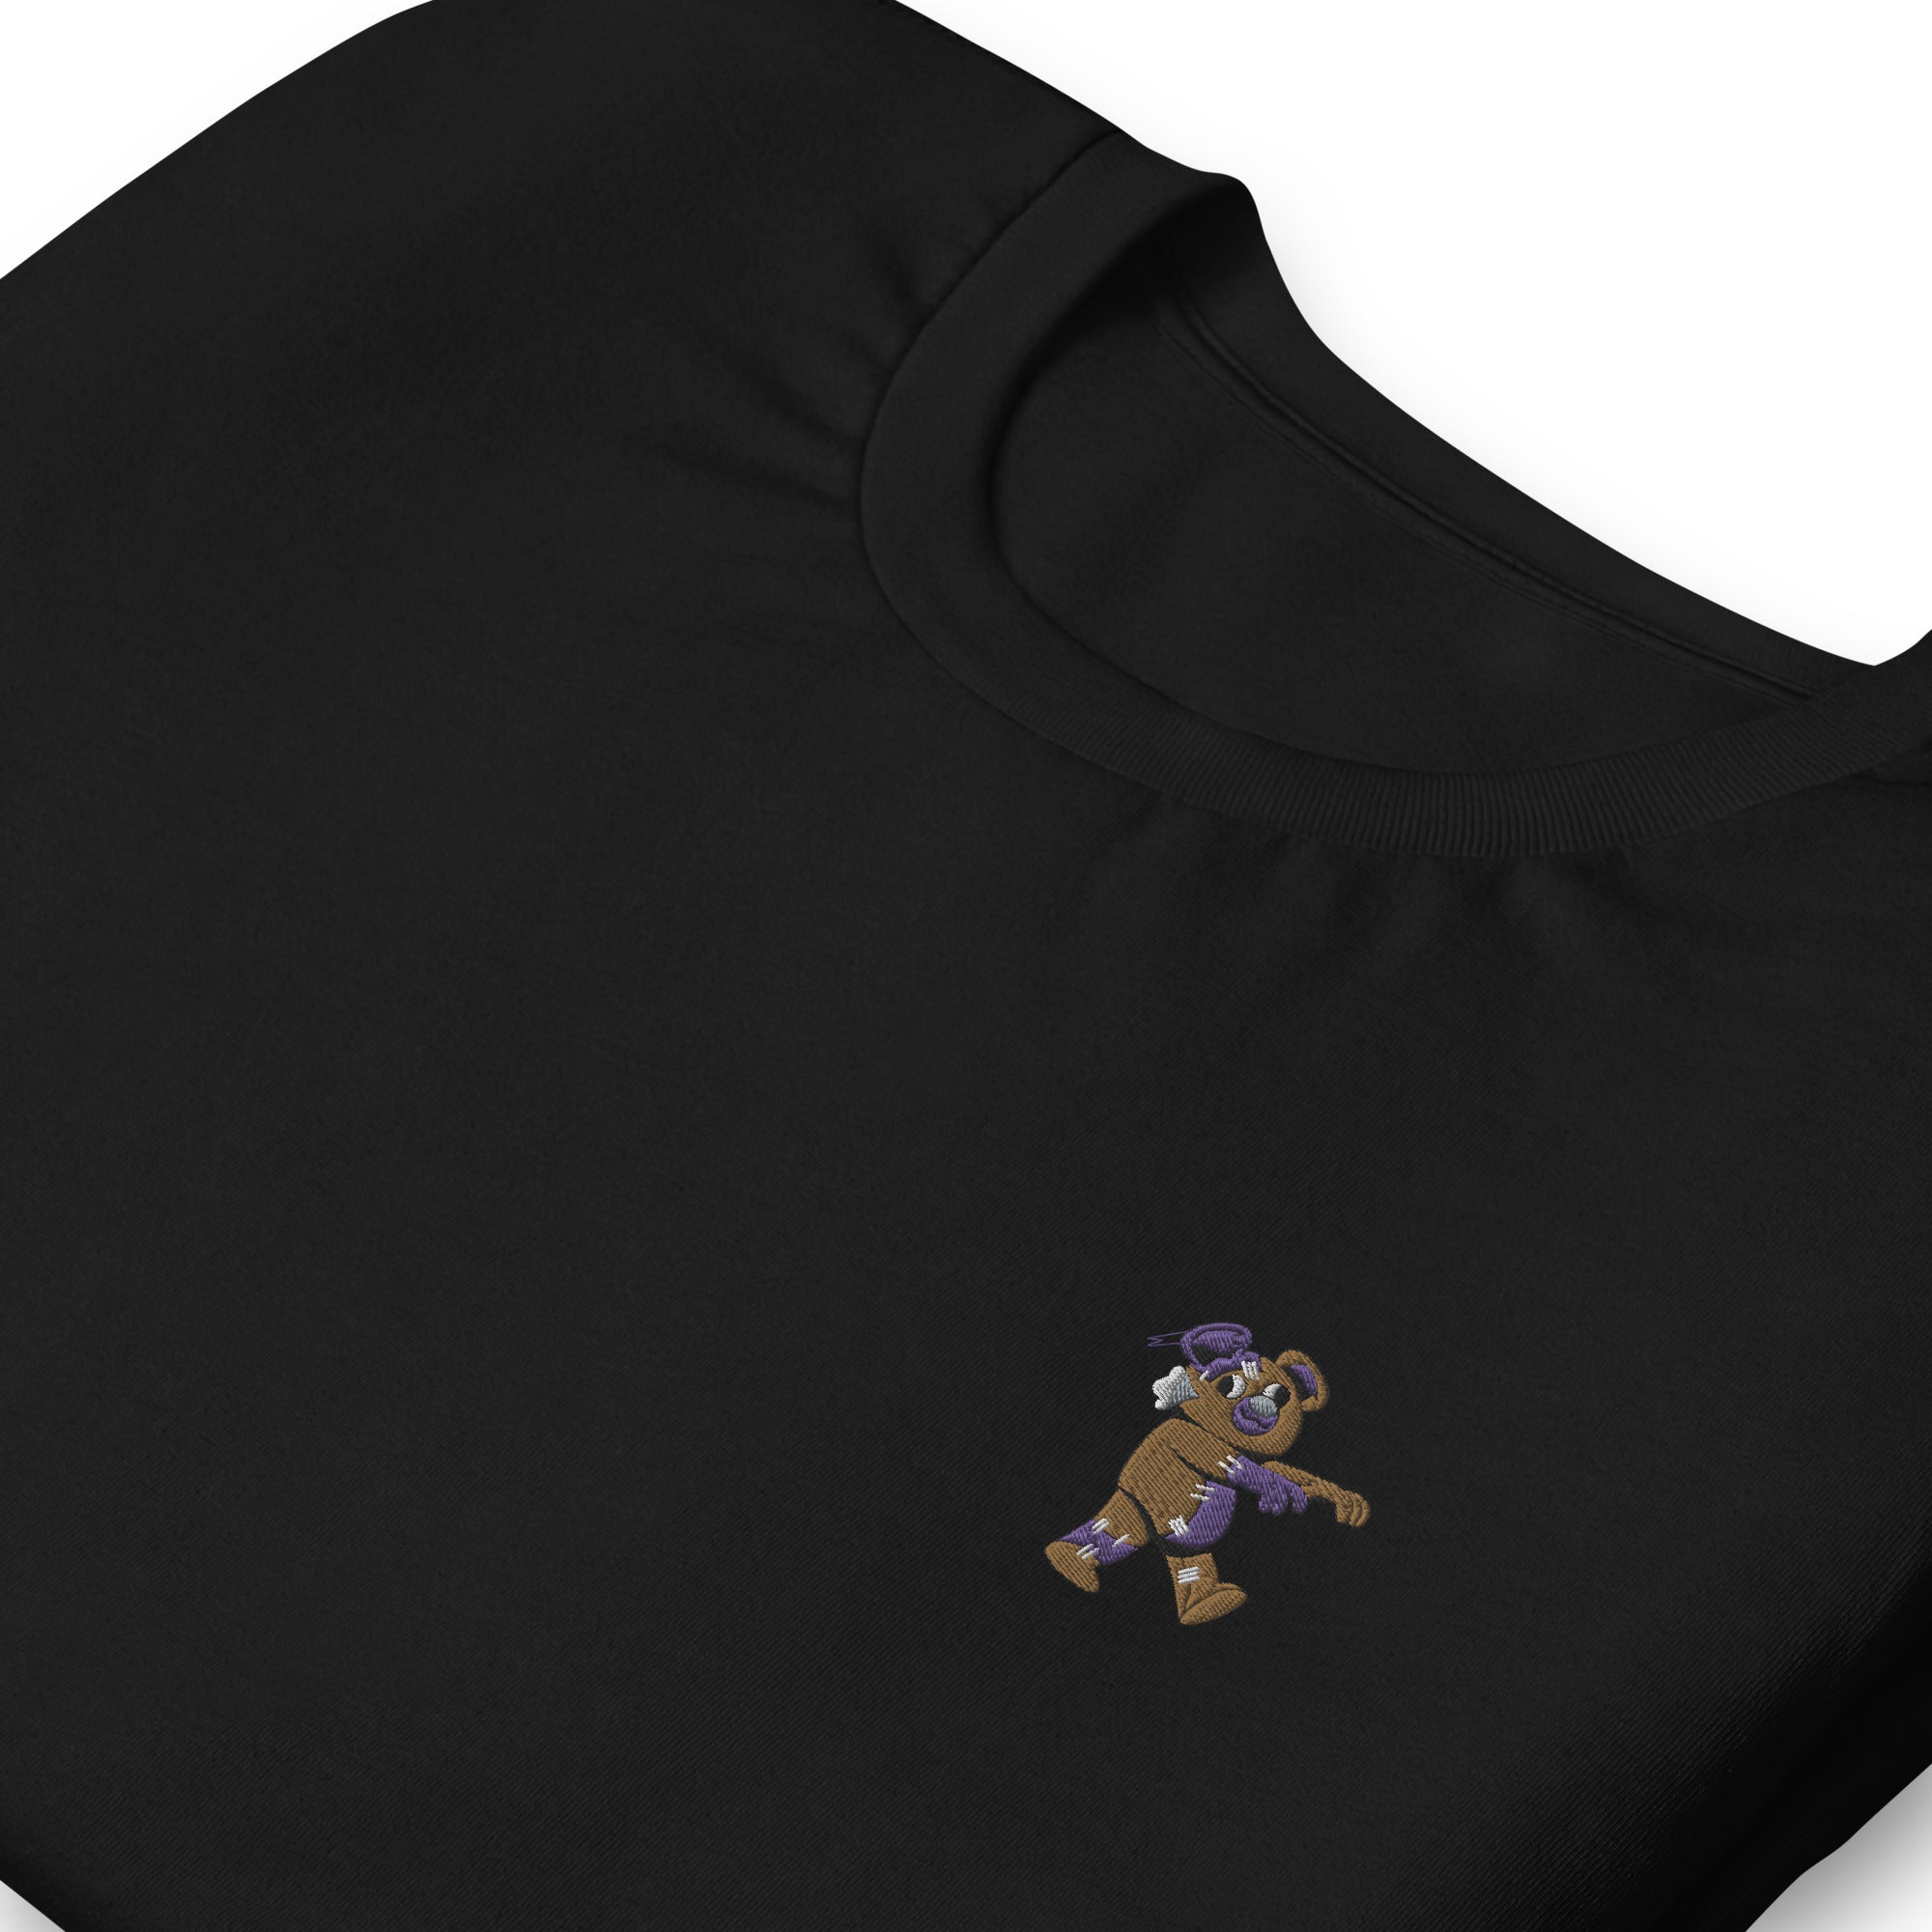 Embroidered Zombie Bear Unisex Tee